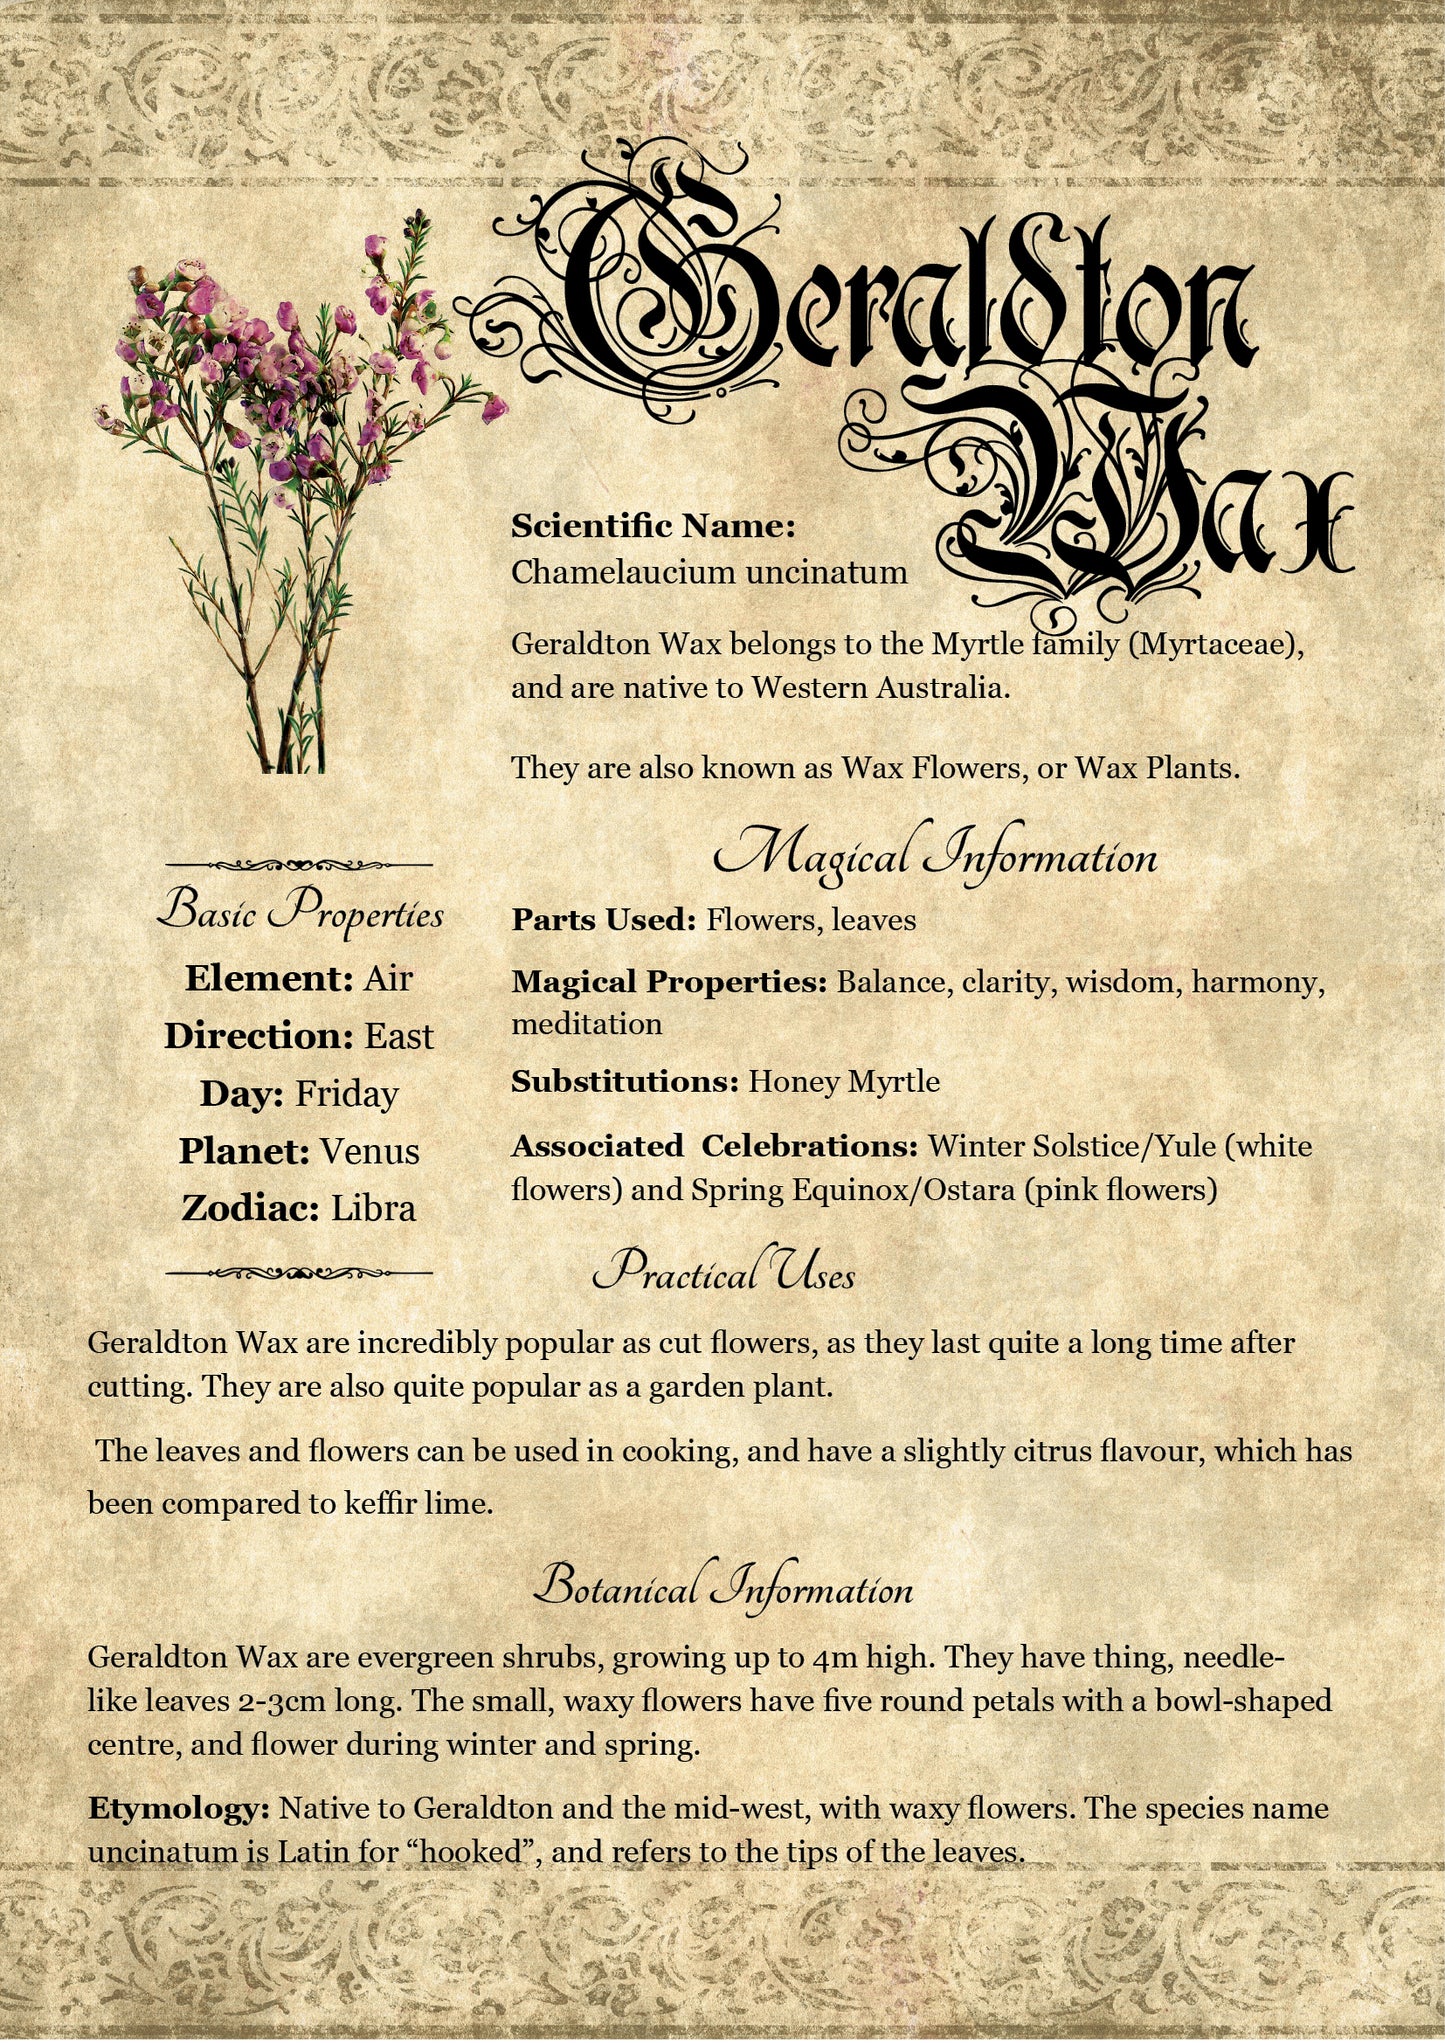 Antique-style grimoire page on the properties of Geraldton Wax, with an aged paper background and readable serif font